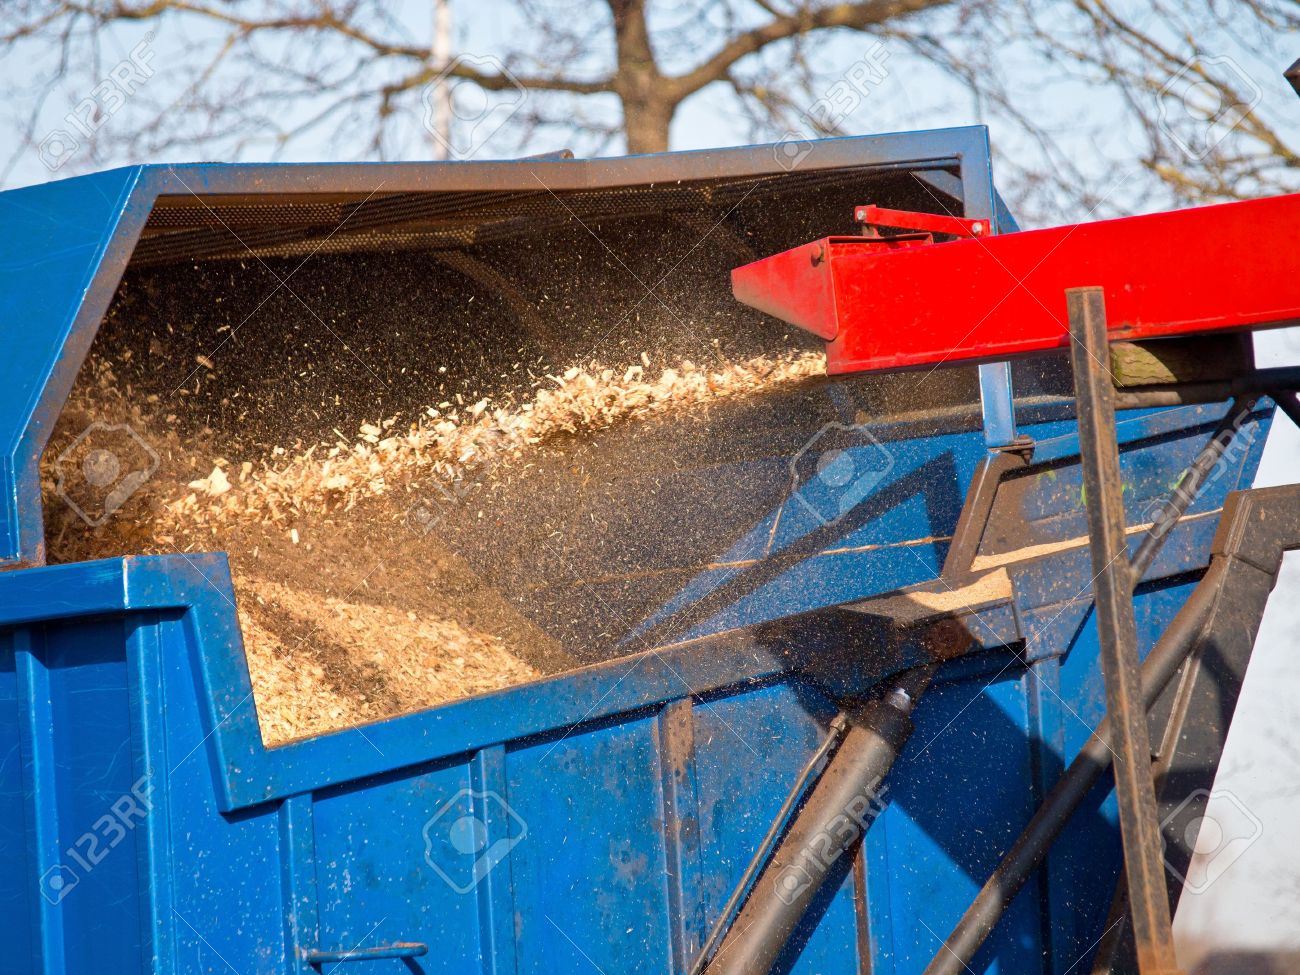 13334989-Wood-Chipper-Machine-Filling-Back-Of-Truck-With-wood-chips-Stock-Photo.jpg